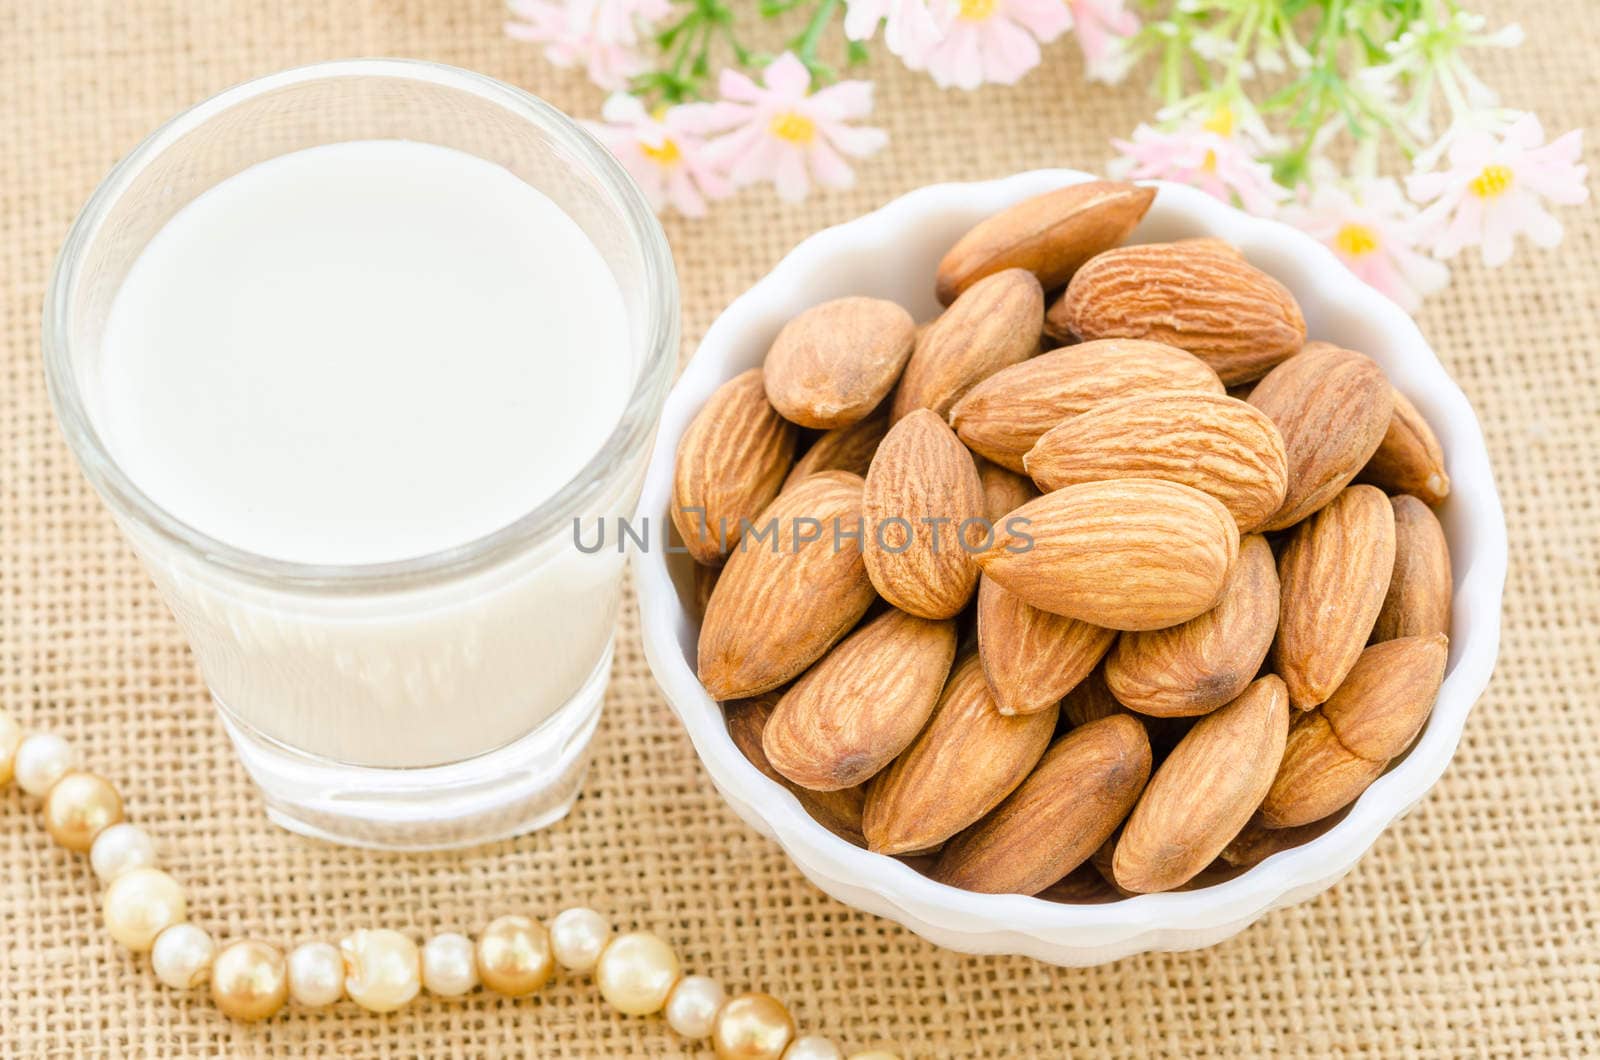 Almond milk in glass and almonds in white cup. by Gamjai